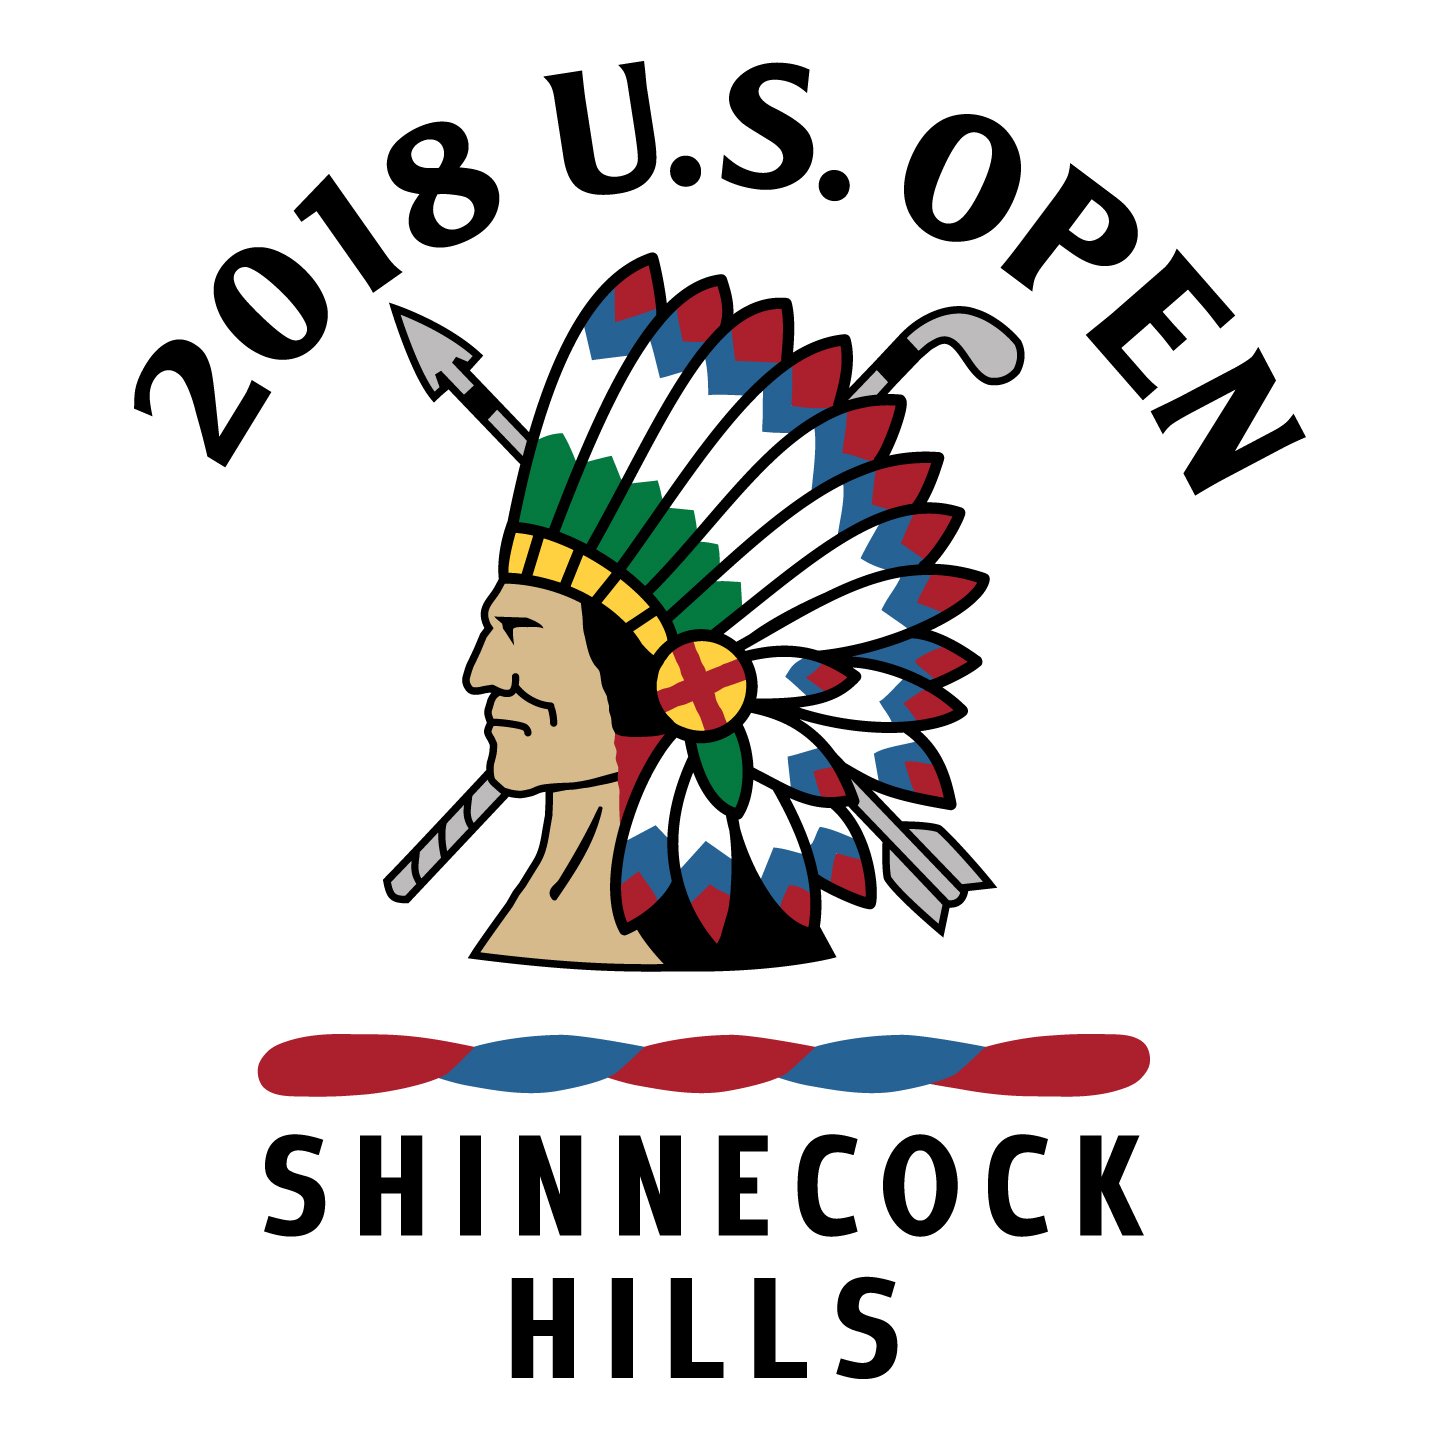 US Open 2018, Live On The 2018 United States Open Championship will be the 118th U.S. Open, scheduled for June 14–17 at Shinnecock Hills Golf Club in Shinnecock